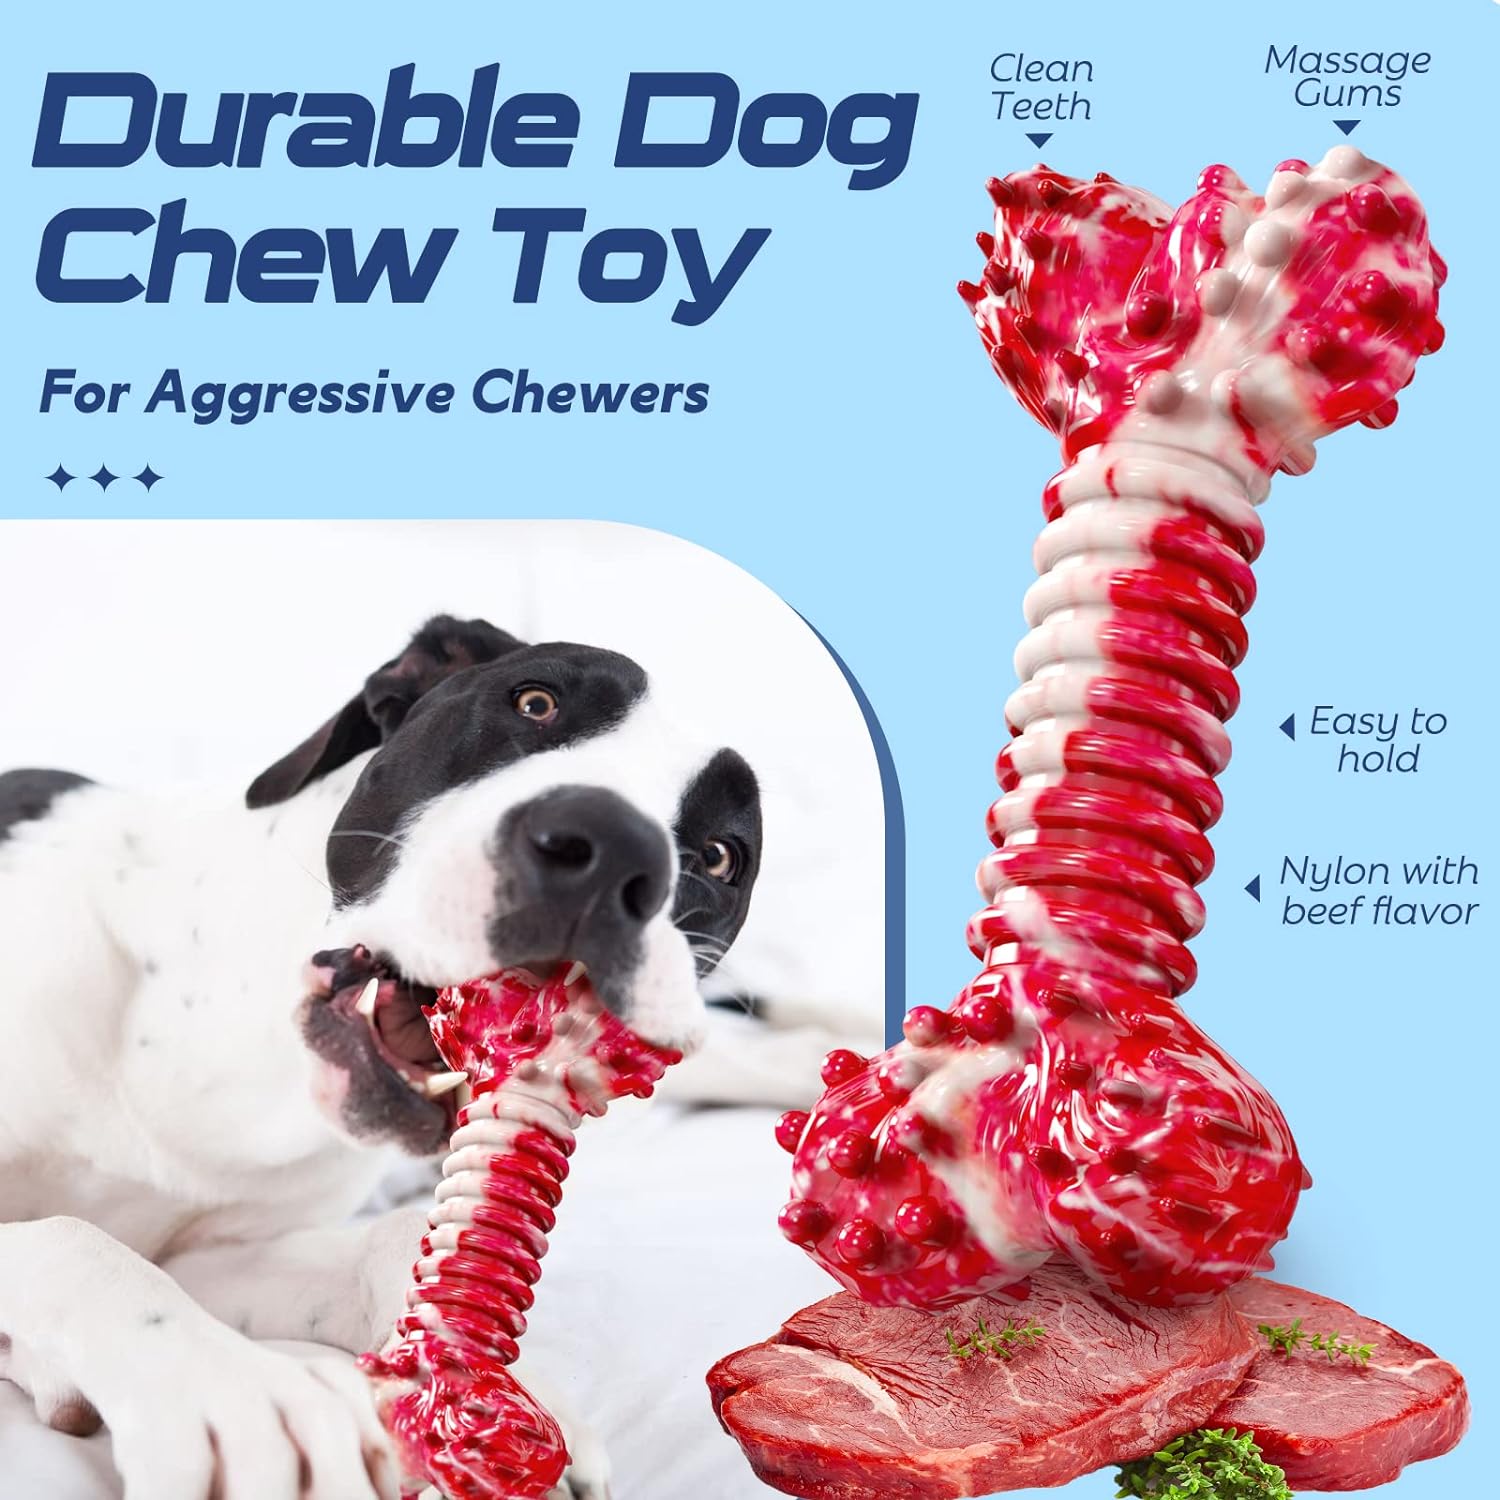 Large Tough Chew Toys for Aggressive Chewers Large Breed,Heavy Duty Dental Rope Toys Kit for Medium Dogs,5 Knots Indestructible Cotton Puppy Teething Chew Tug Toy Set of 9